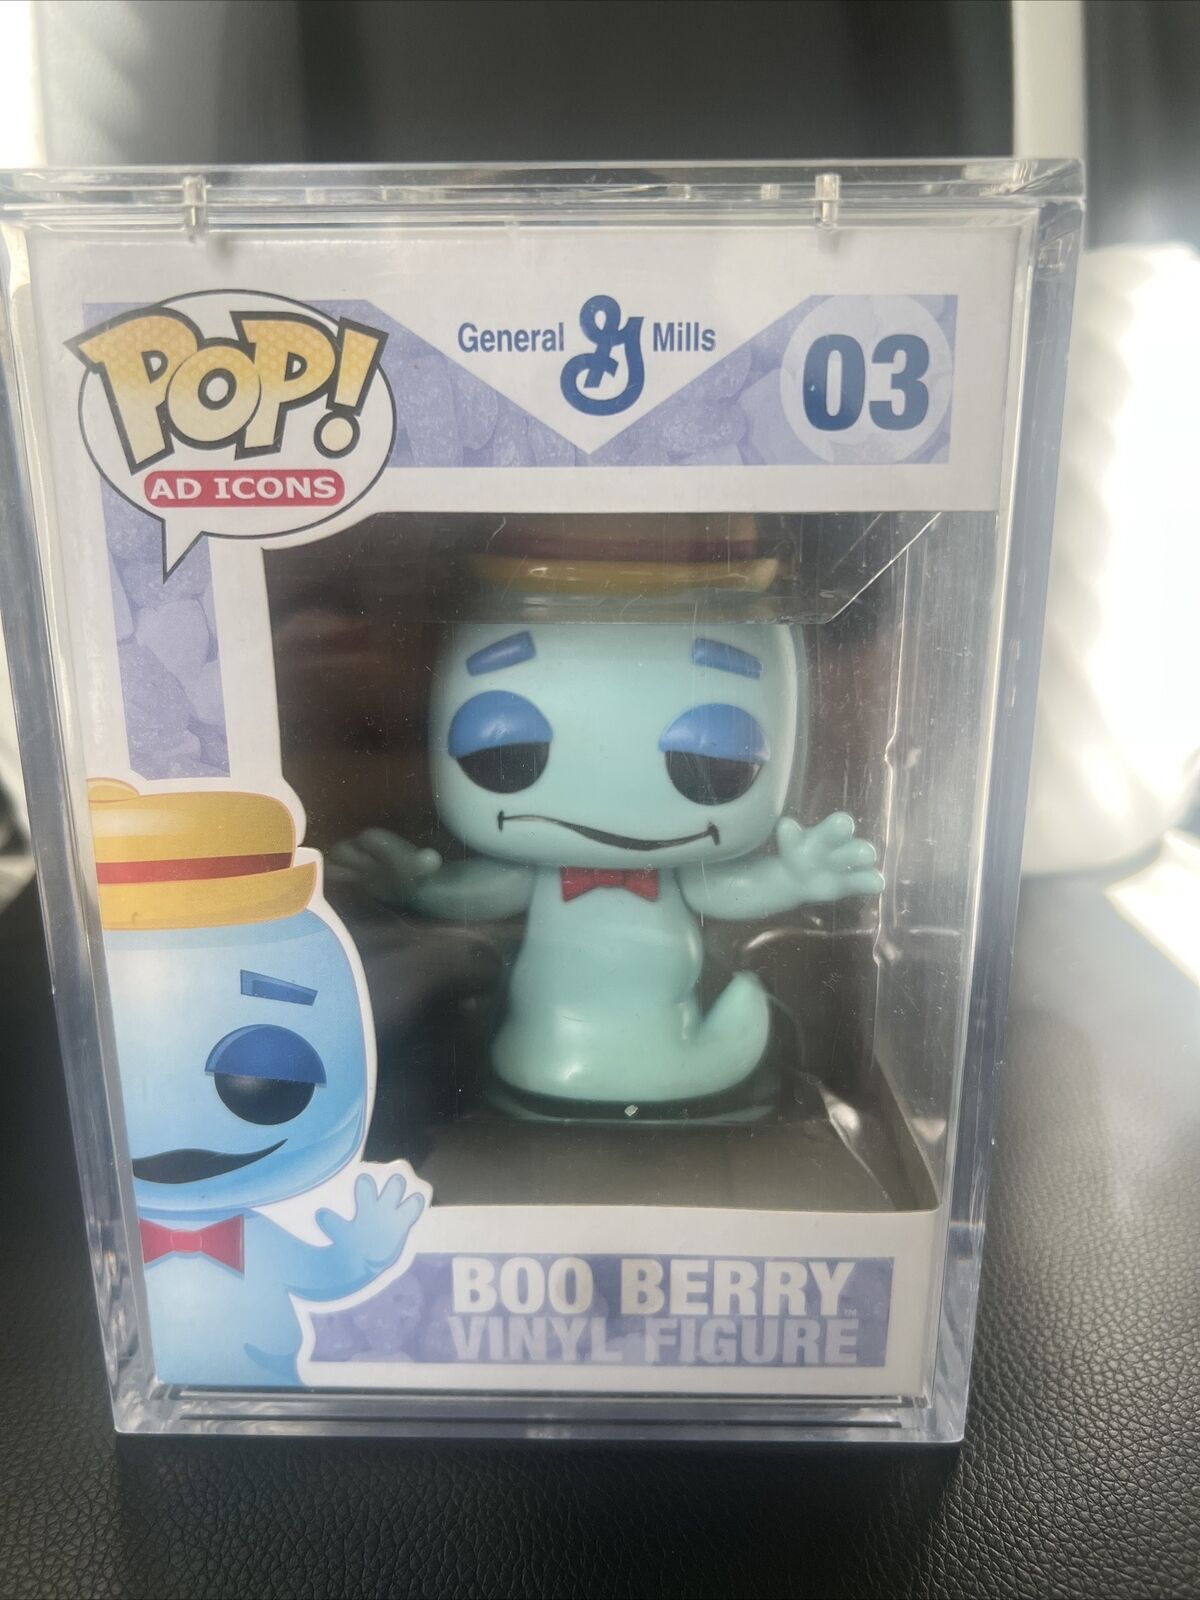 Funko Pop Ad Icons General Mills Boo Berry #03 Rare Vaulted 2011